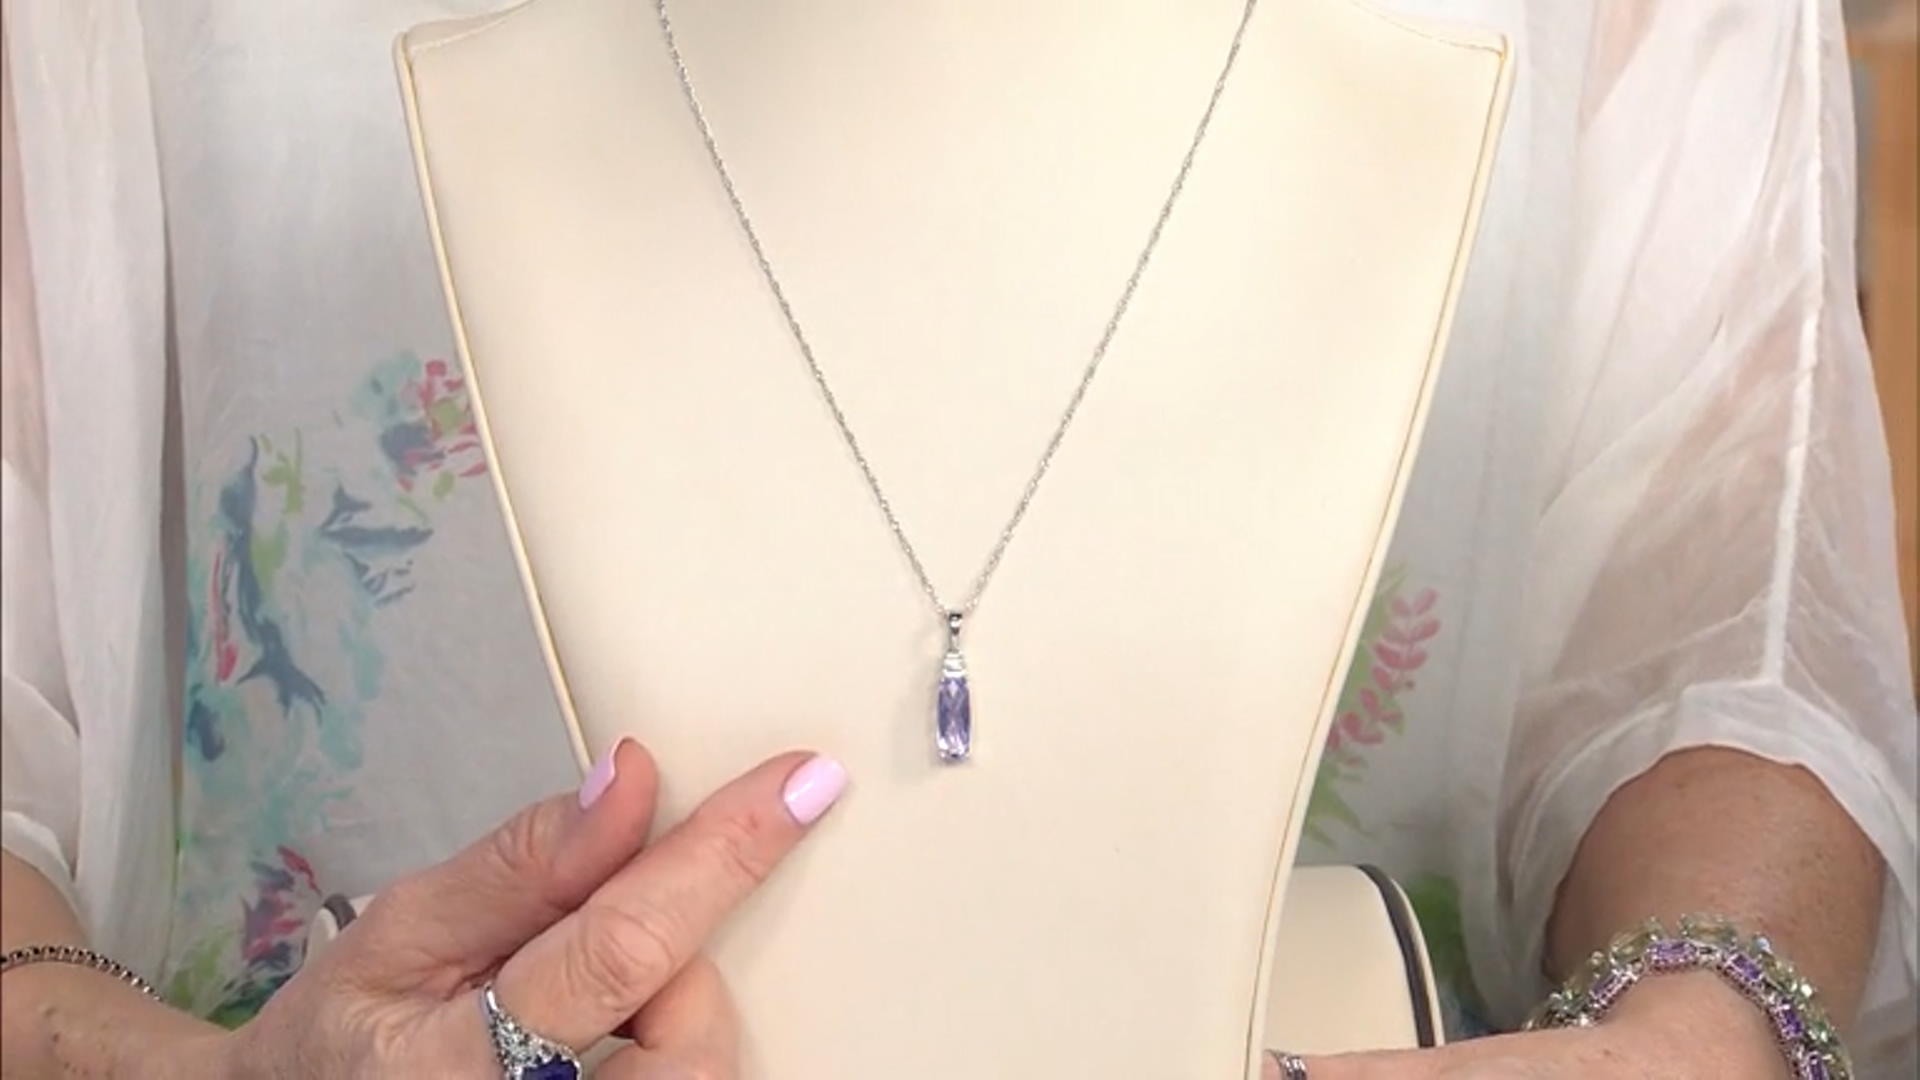 Lavender Amethyst With White Zircon Rhodium Over Sterling Silver Pendant With Chain 2.95ctw Video Thumbnail